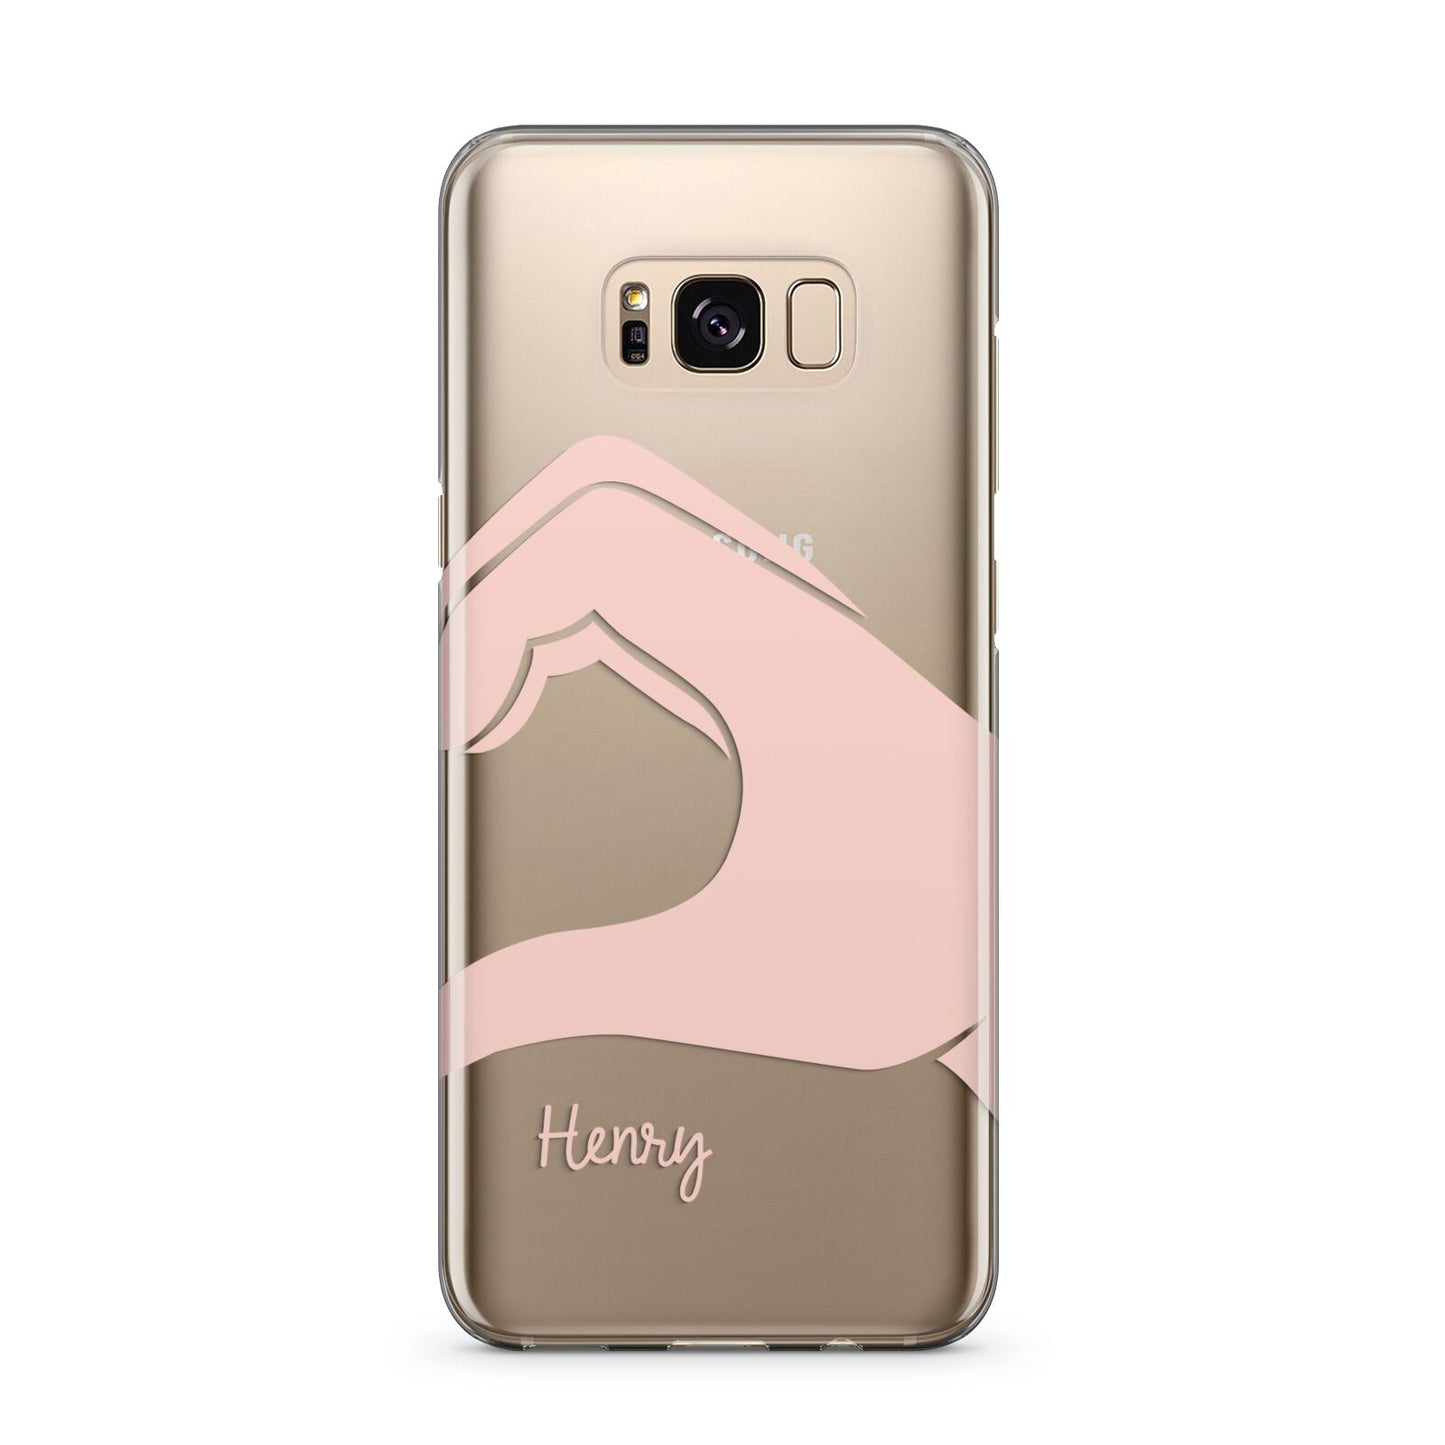 Right Hand in Half Heart with Name Samsung Galaxy S8 Plus Case